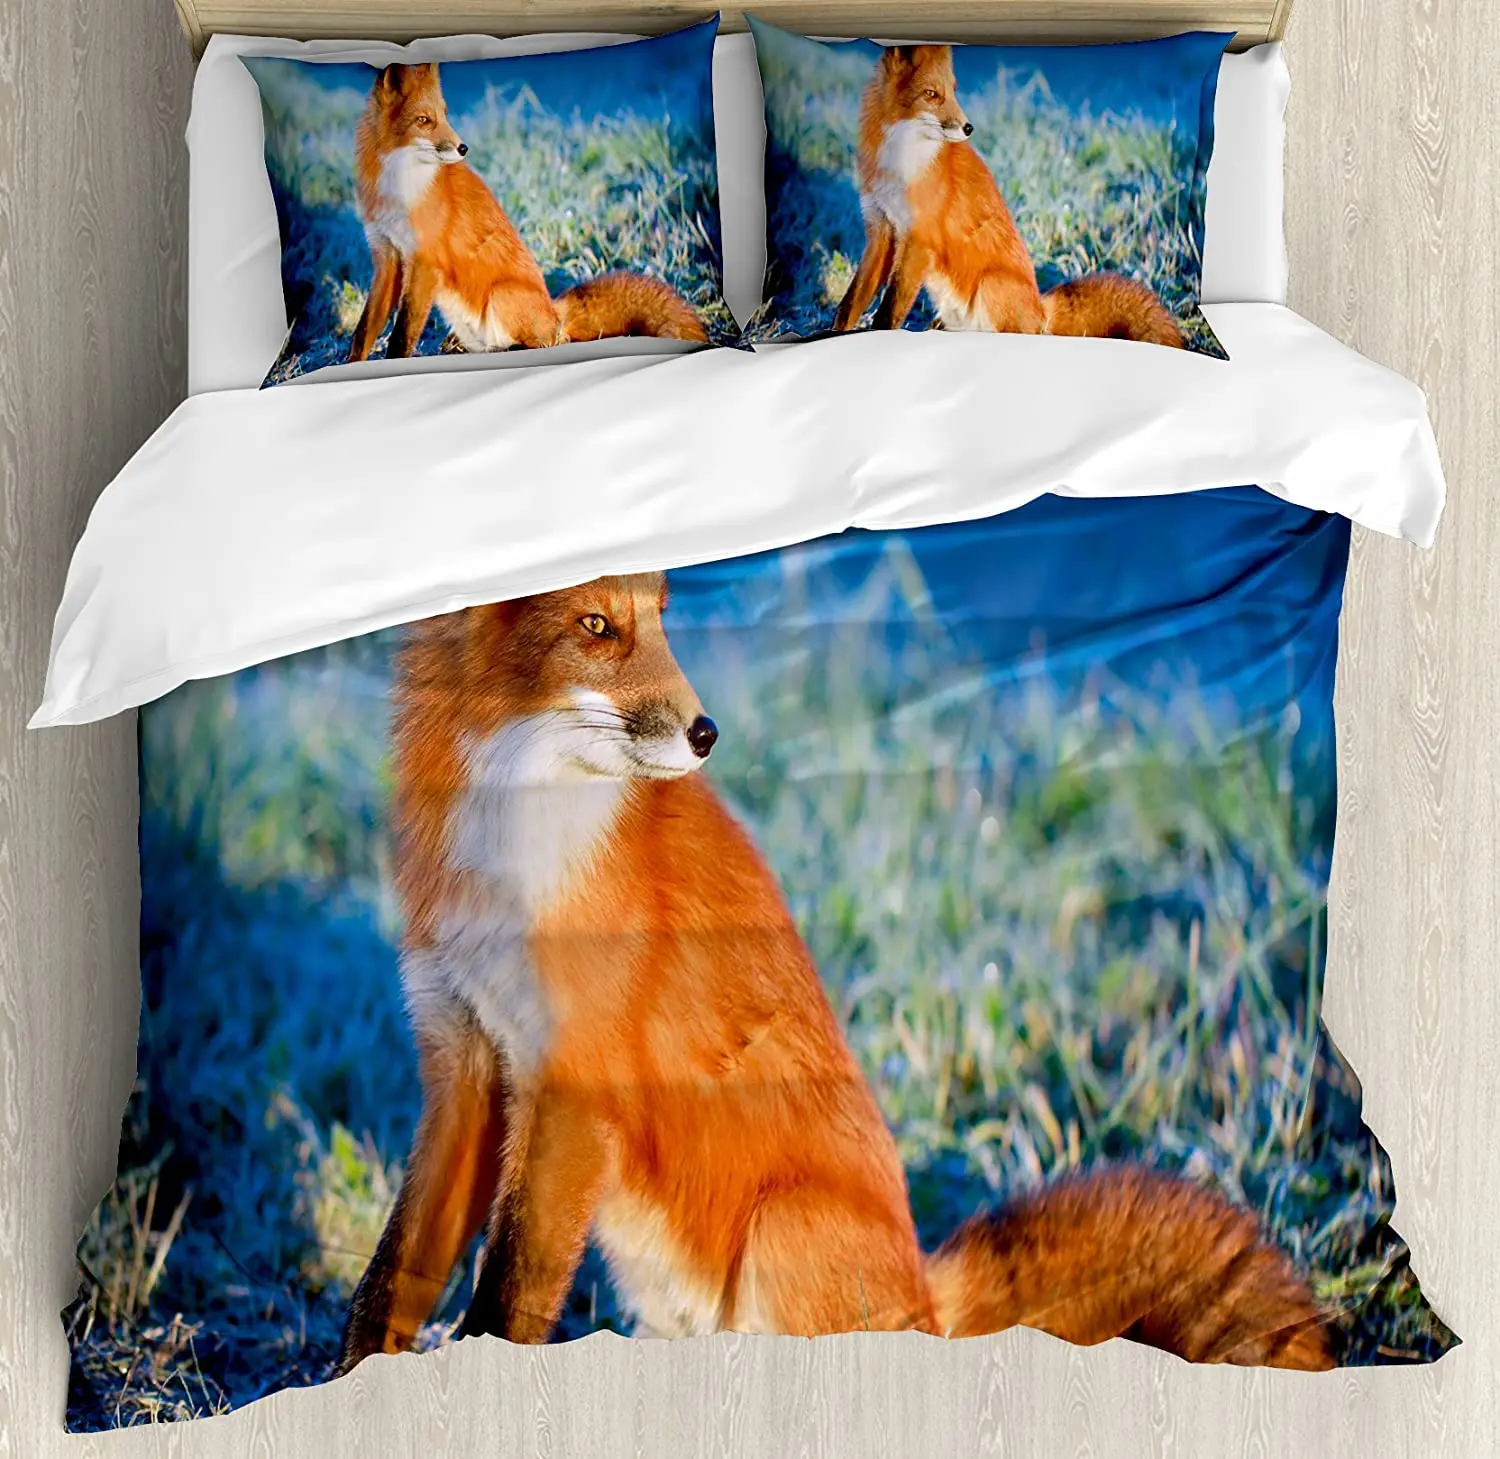 

Fox Bedding Set For Bedroom Bed Home Serene Autumn Field in Cold Morning with Fox Nature S Duvet Cover Quilt Cover Pillowcase